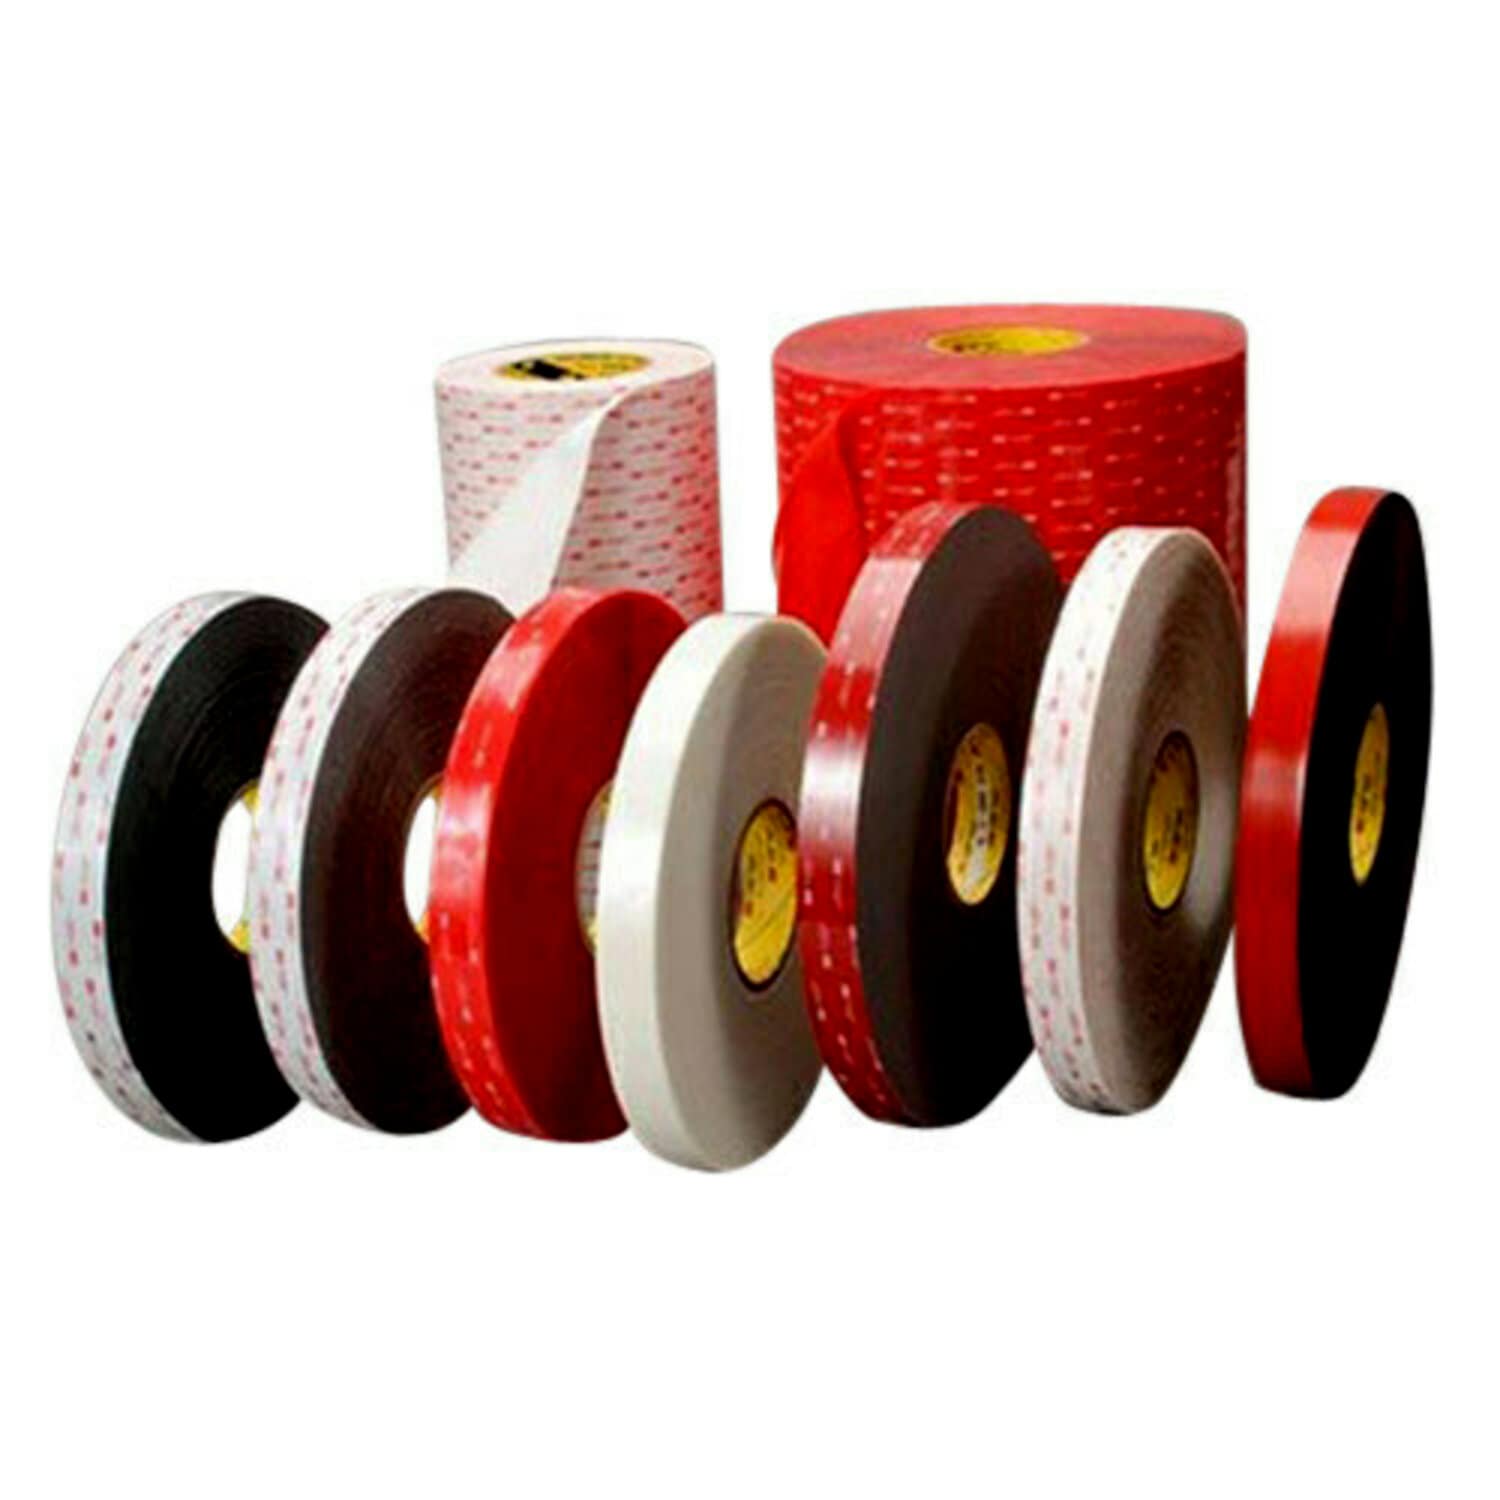 Acrylic Tape 50m Multi-role Strong Super Slim 2mm Double Sided